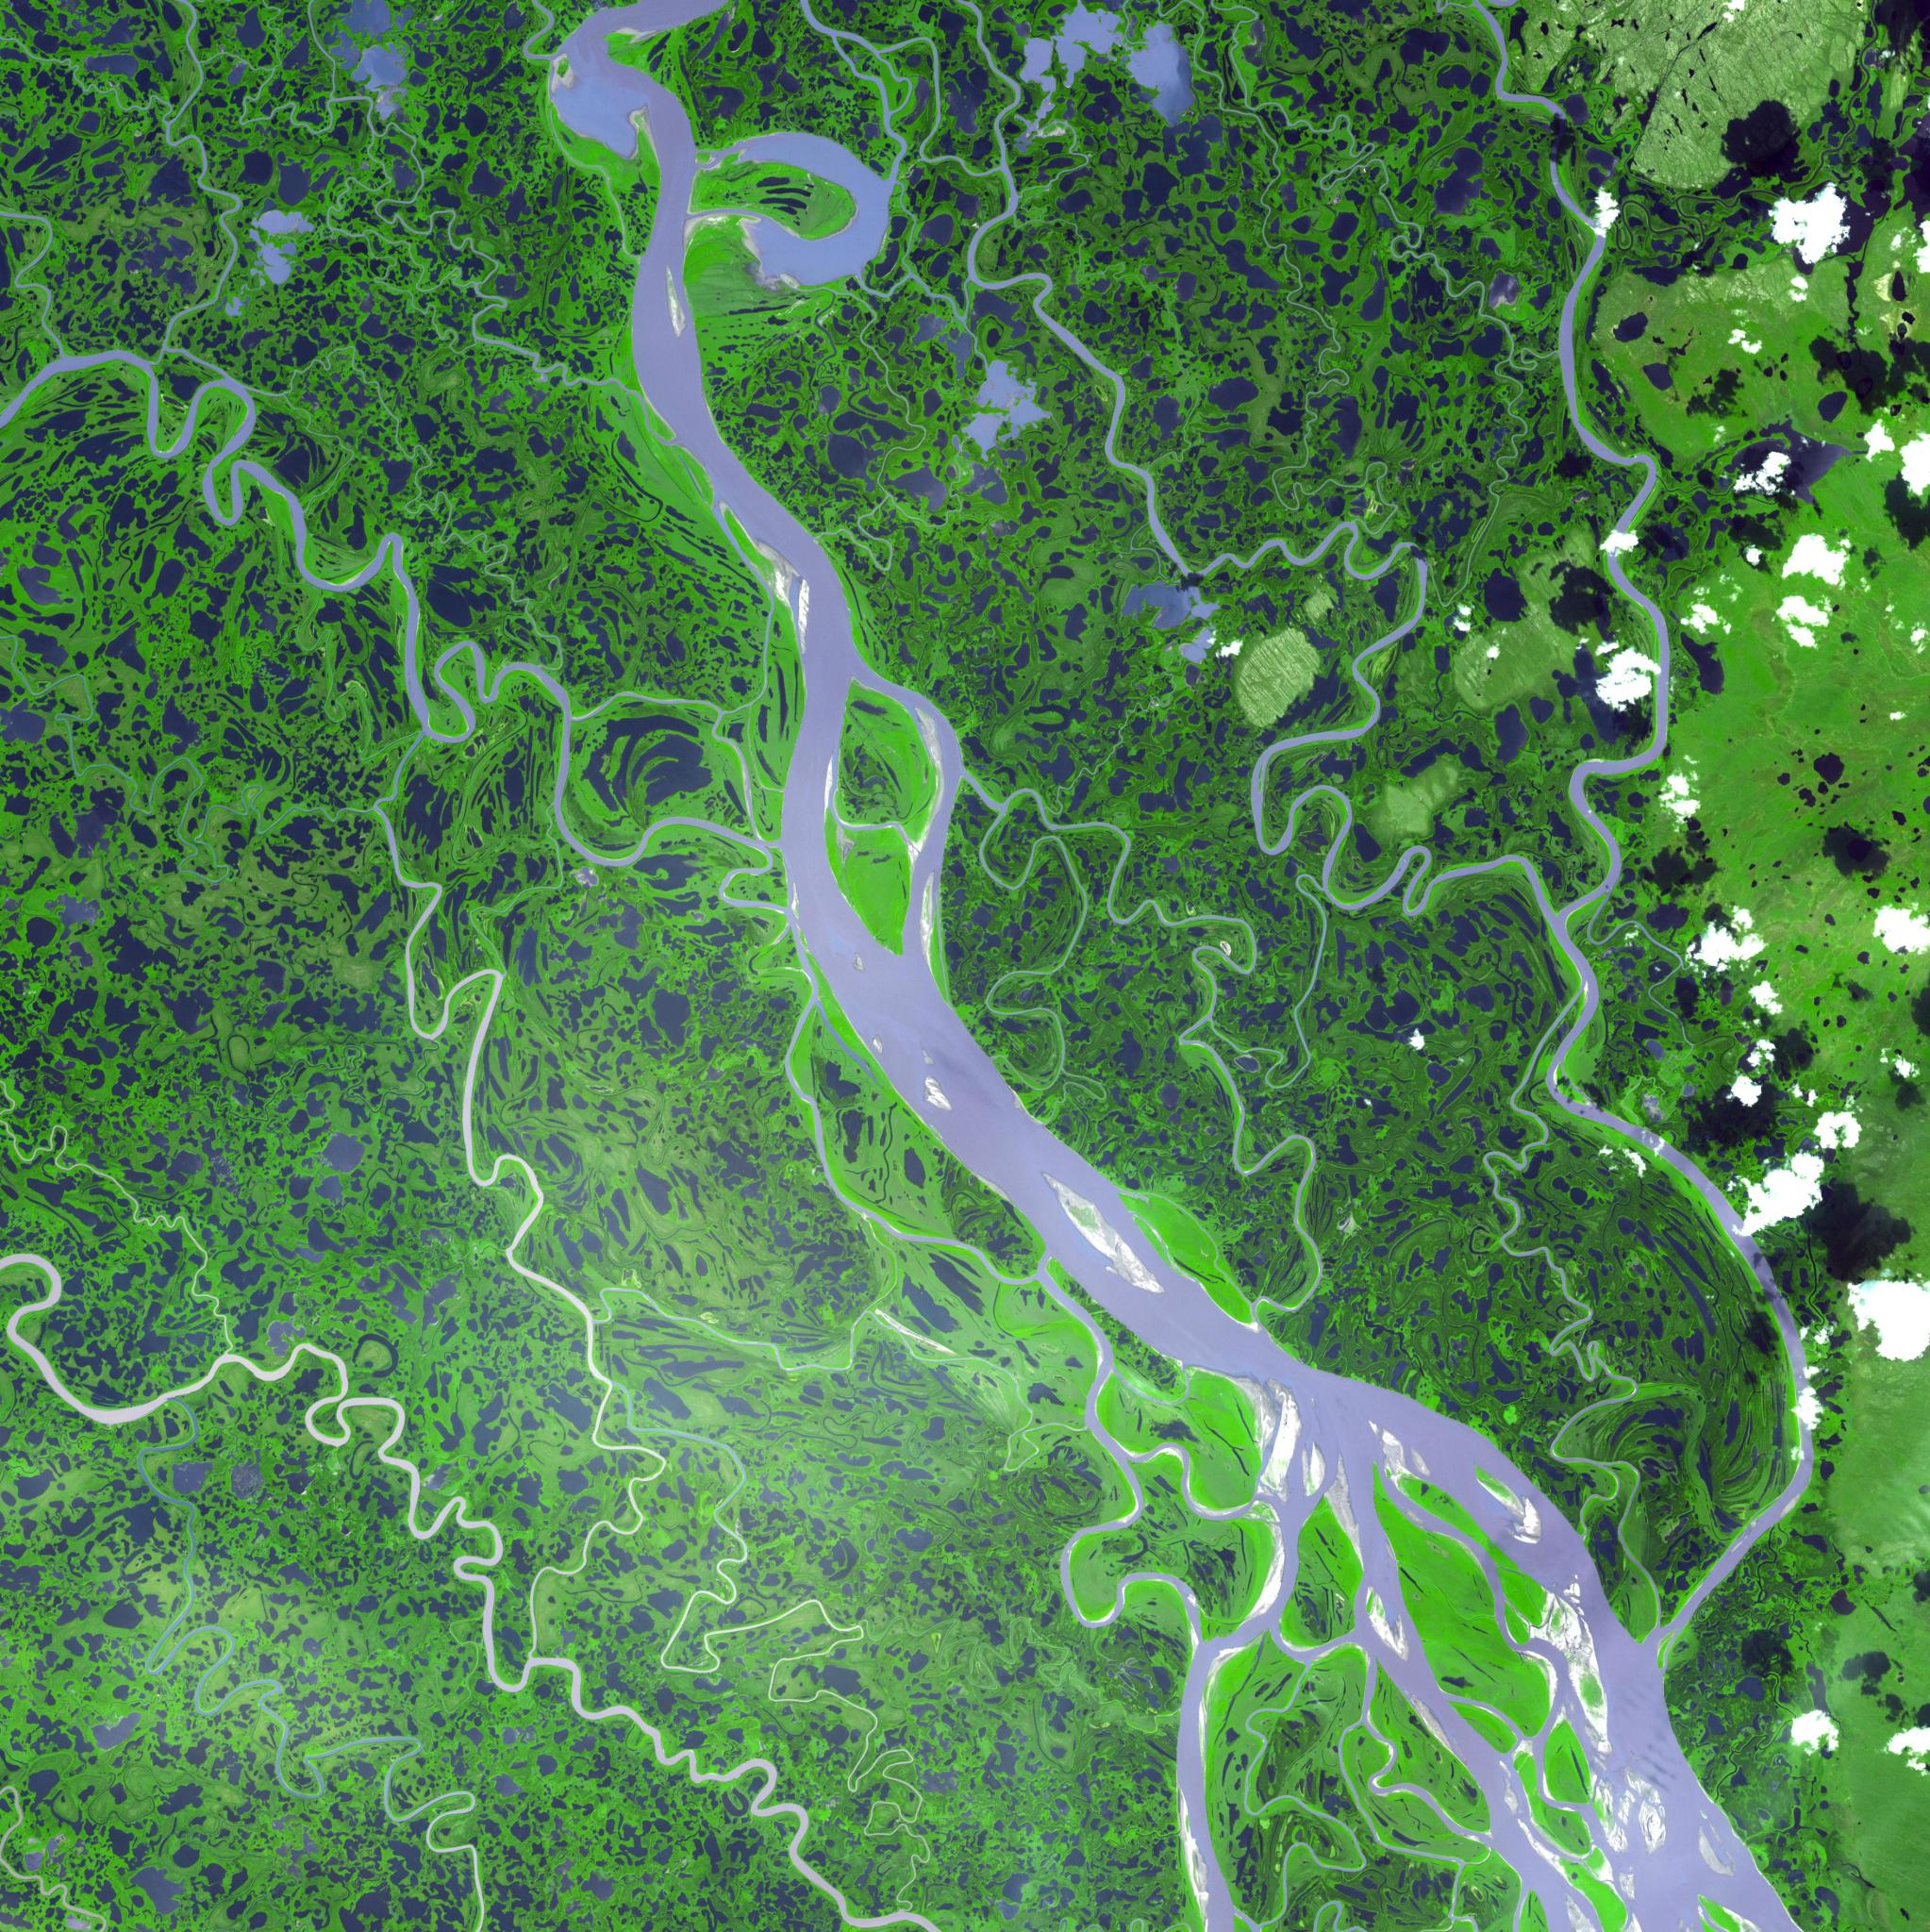 Like a conveyer belt of carbon, the Mackenzie River, seen here in 2007 from NASA’s Terra satellite, drains an area of almost 700,000 square miles (1.8 million square kilometers) on its journey north to the Arctic Ocean. Some of the carbon originates from thawing permafrost and peatlands.